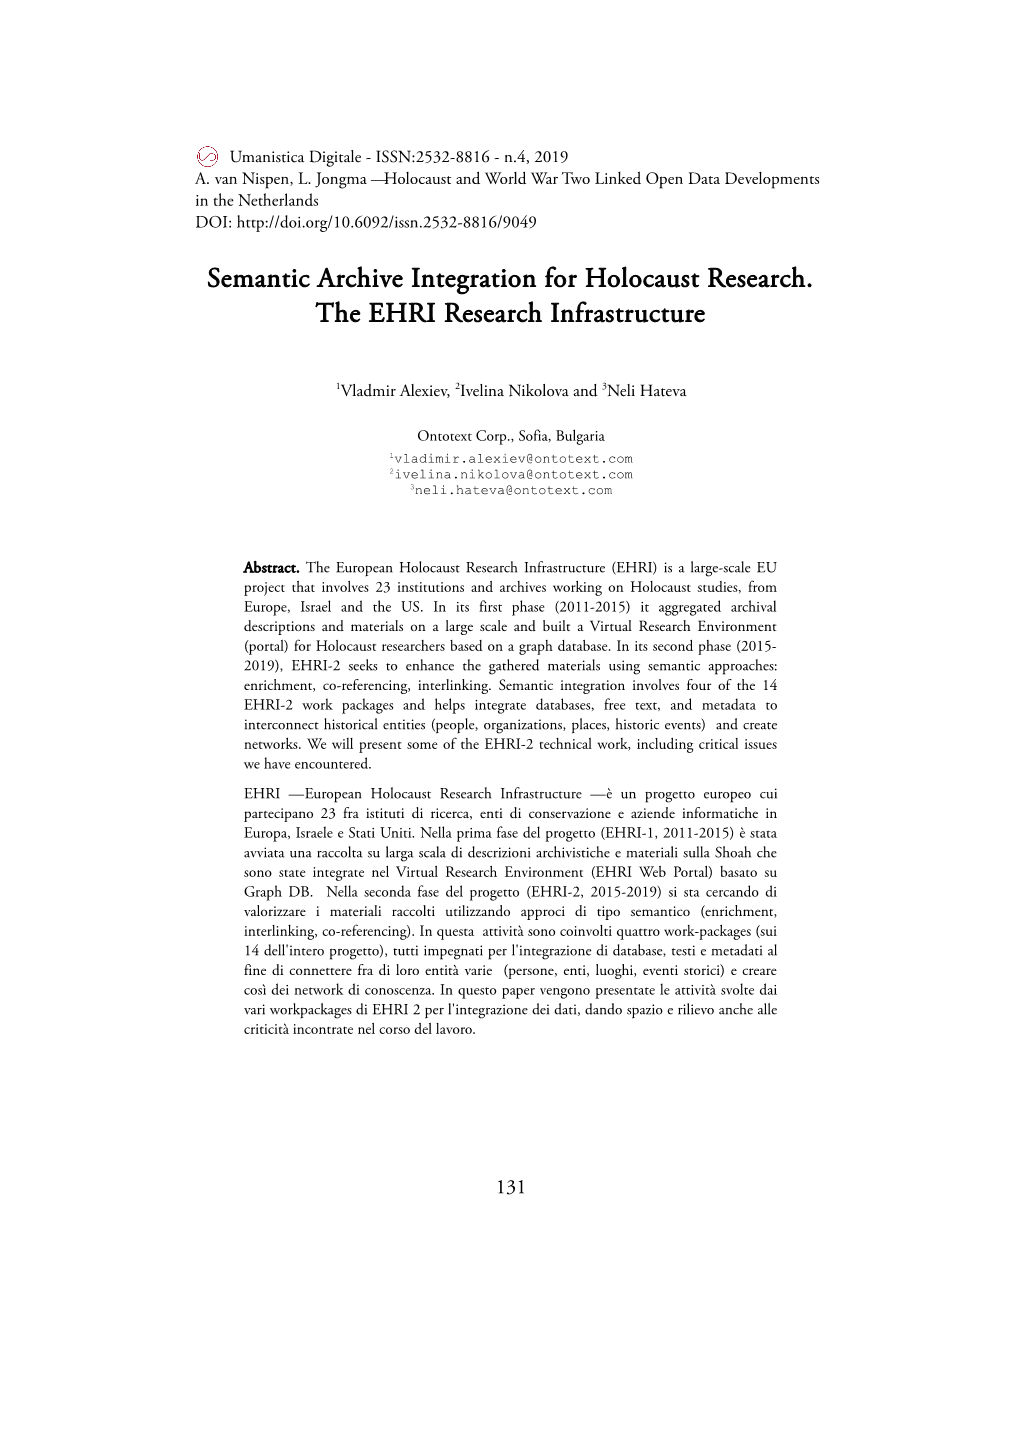 Semantic Archive Integration for Holocaust Research. the EHRI Research Infrastructure